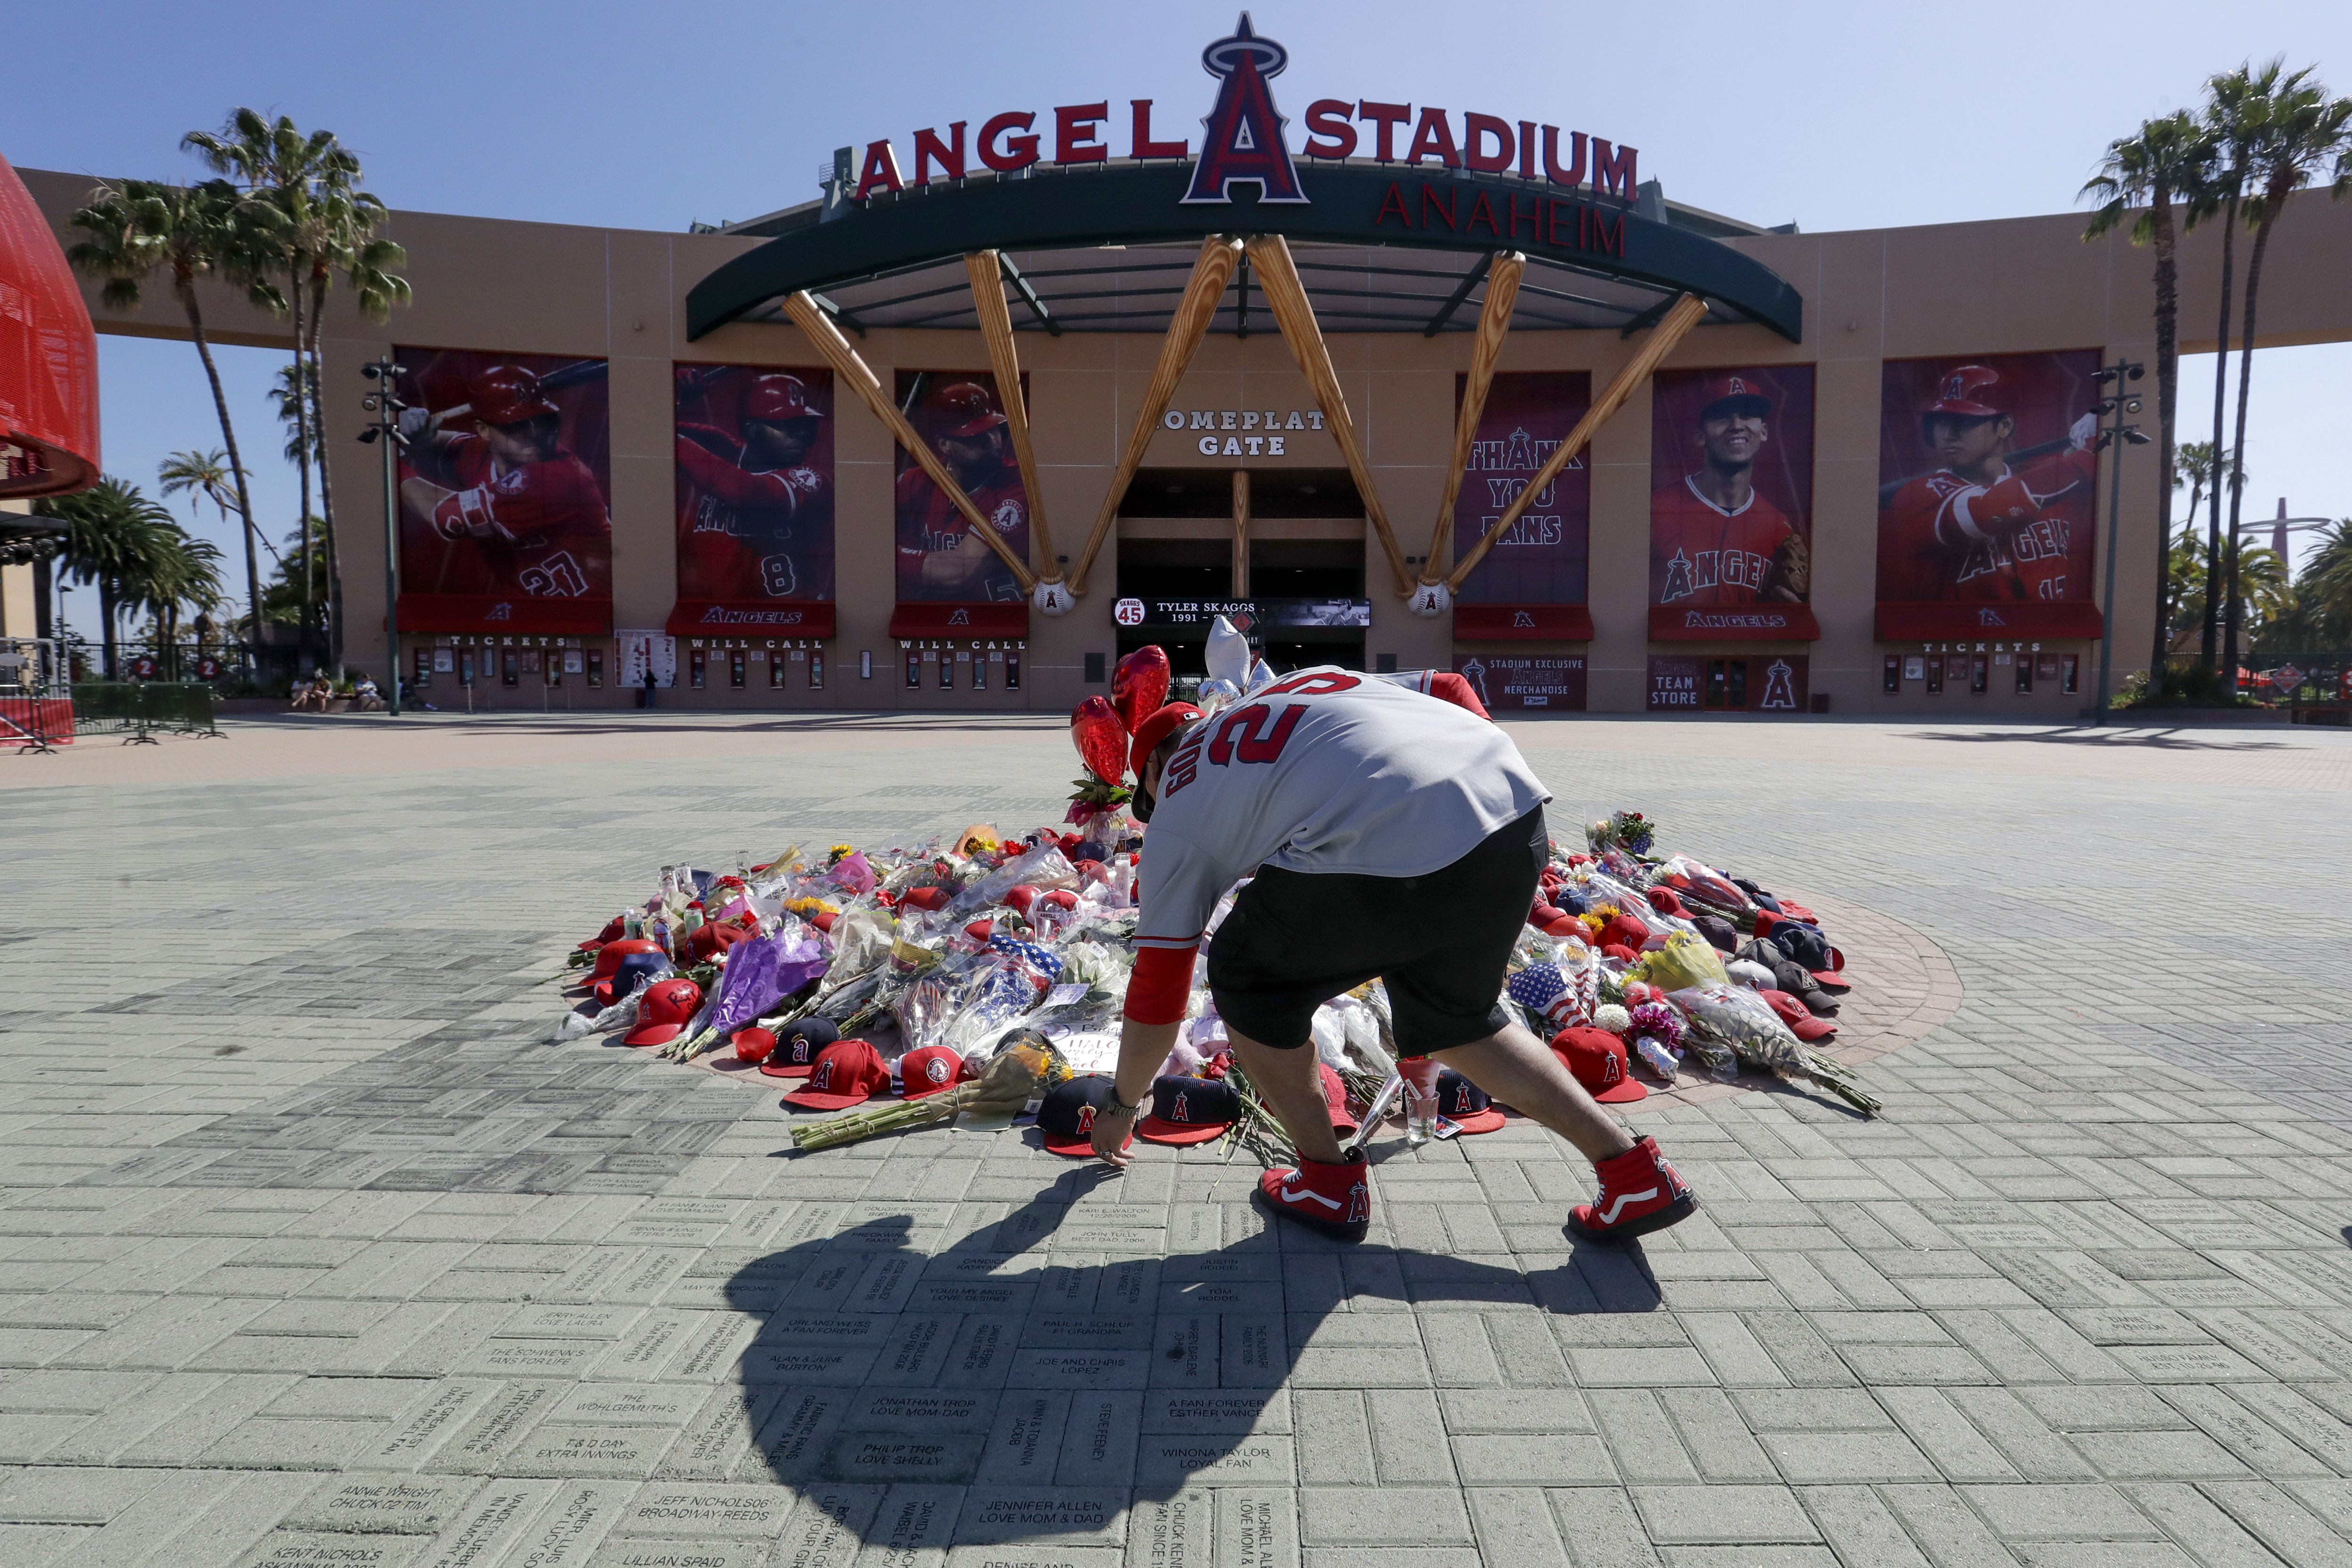 Angels say pitcher Tyler Skaggs has died at age 27